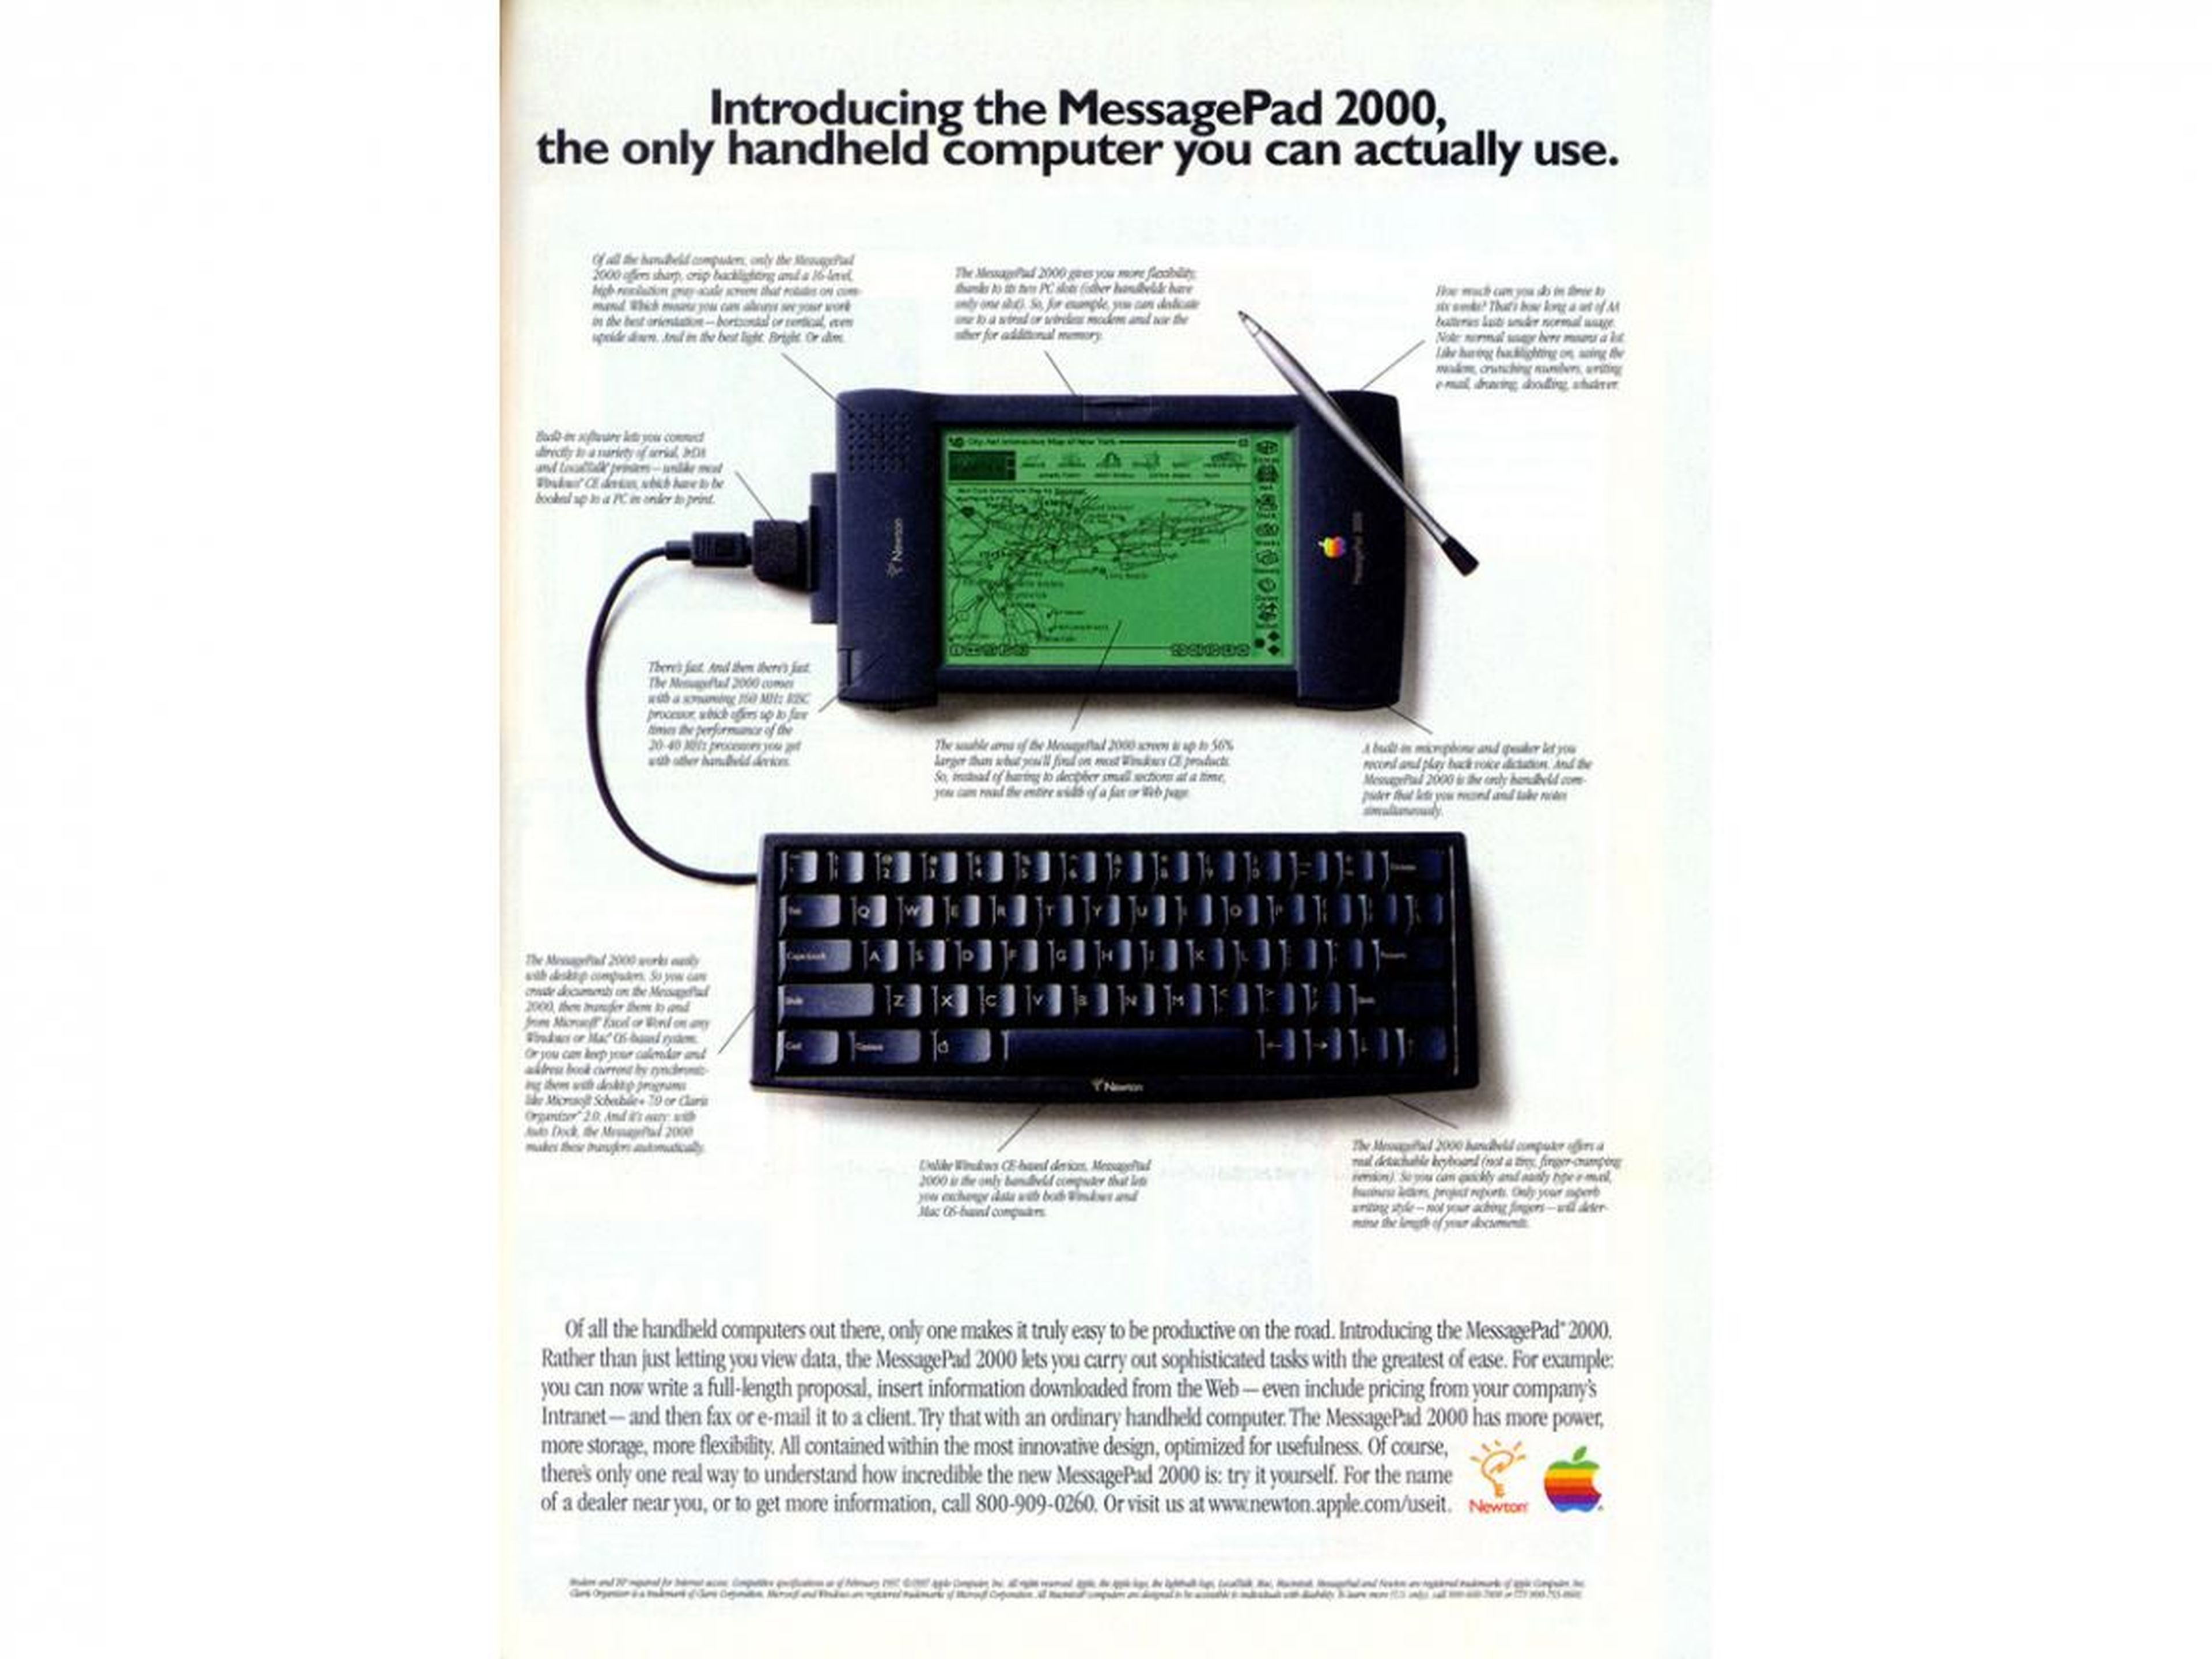 Apple tried to make handheld devices that could be used like computers, much like it does today with the iPad.